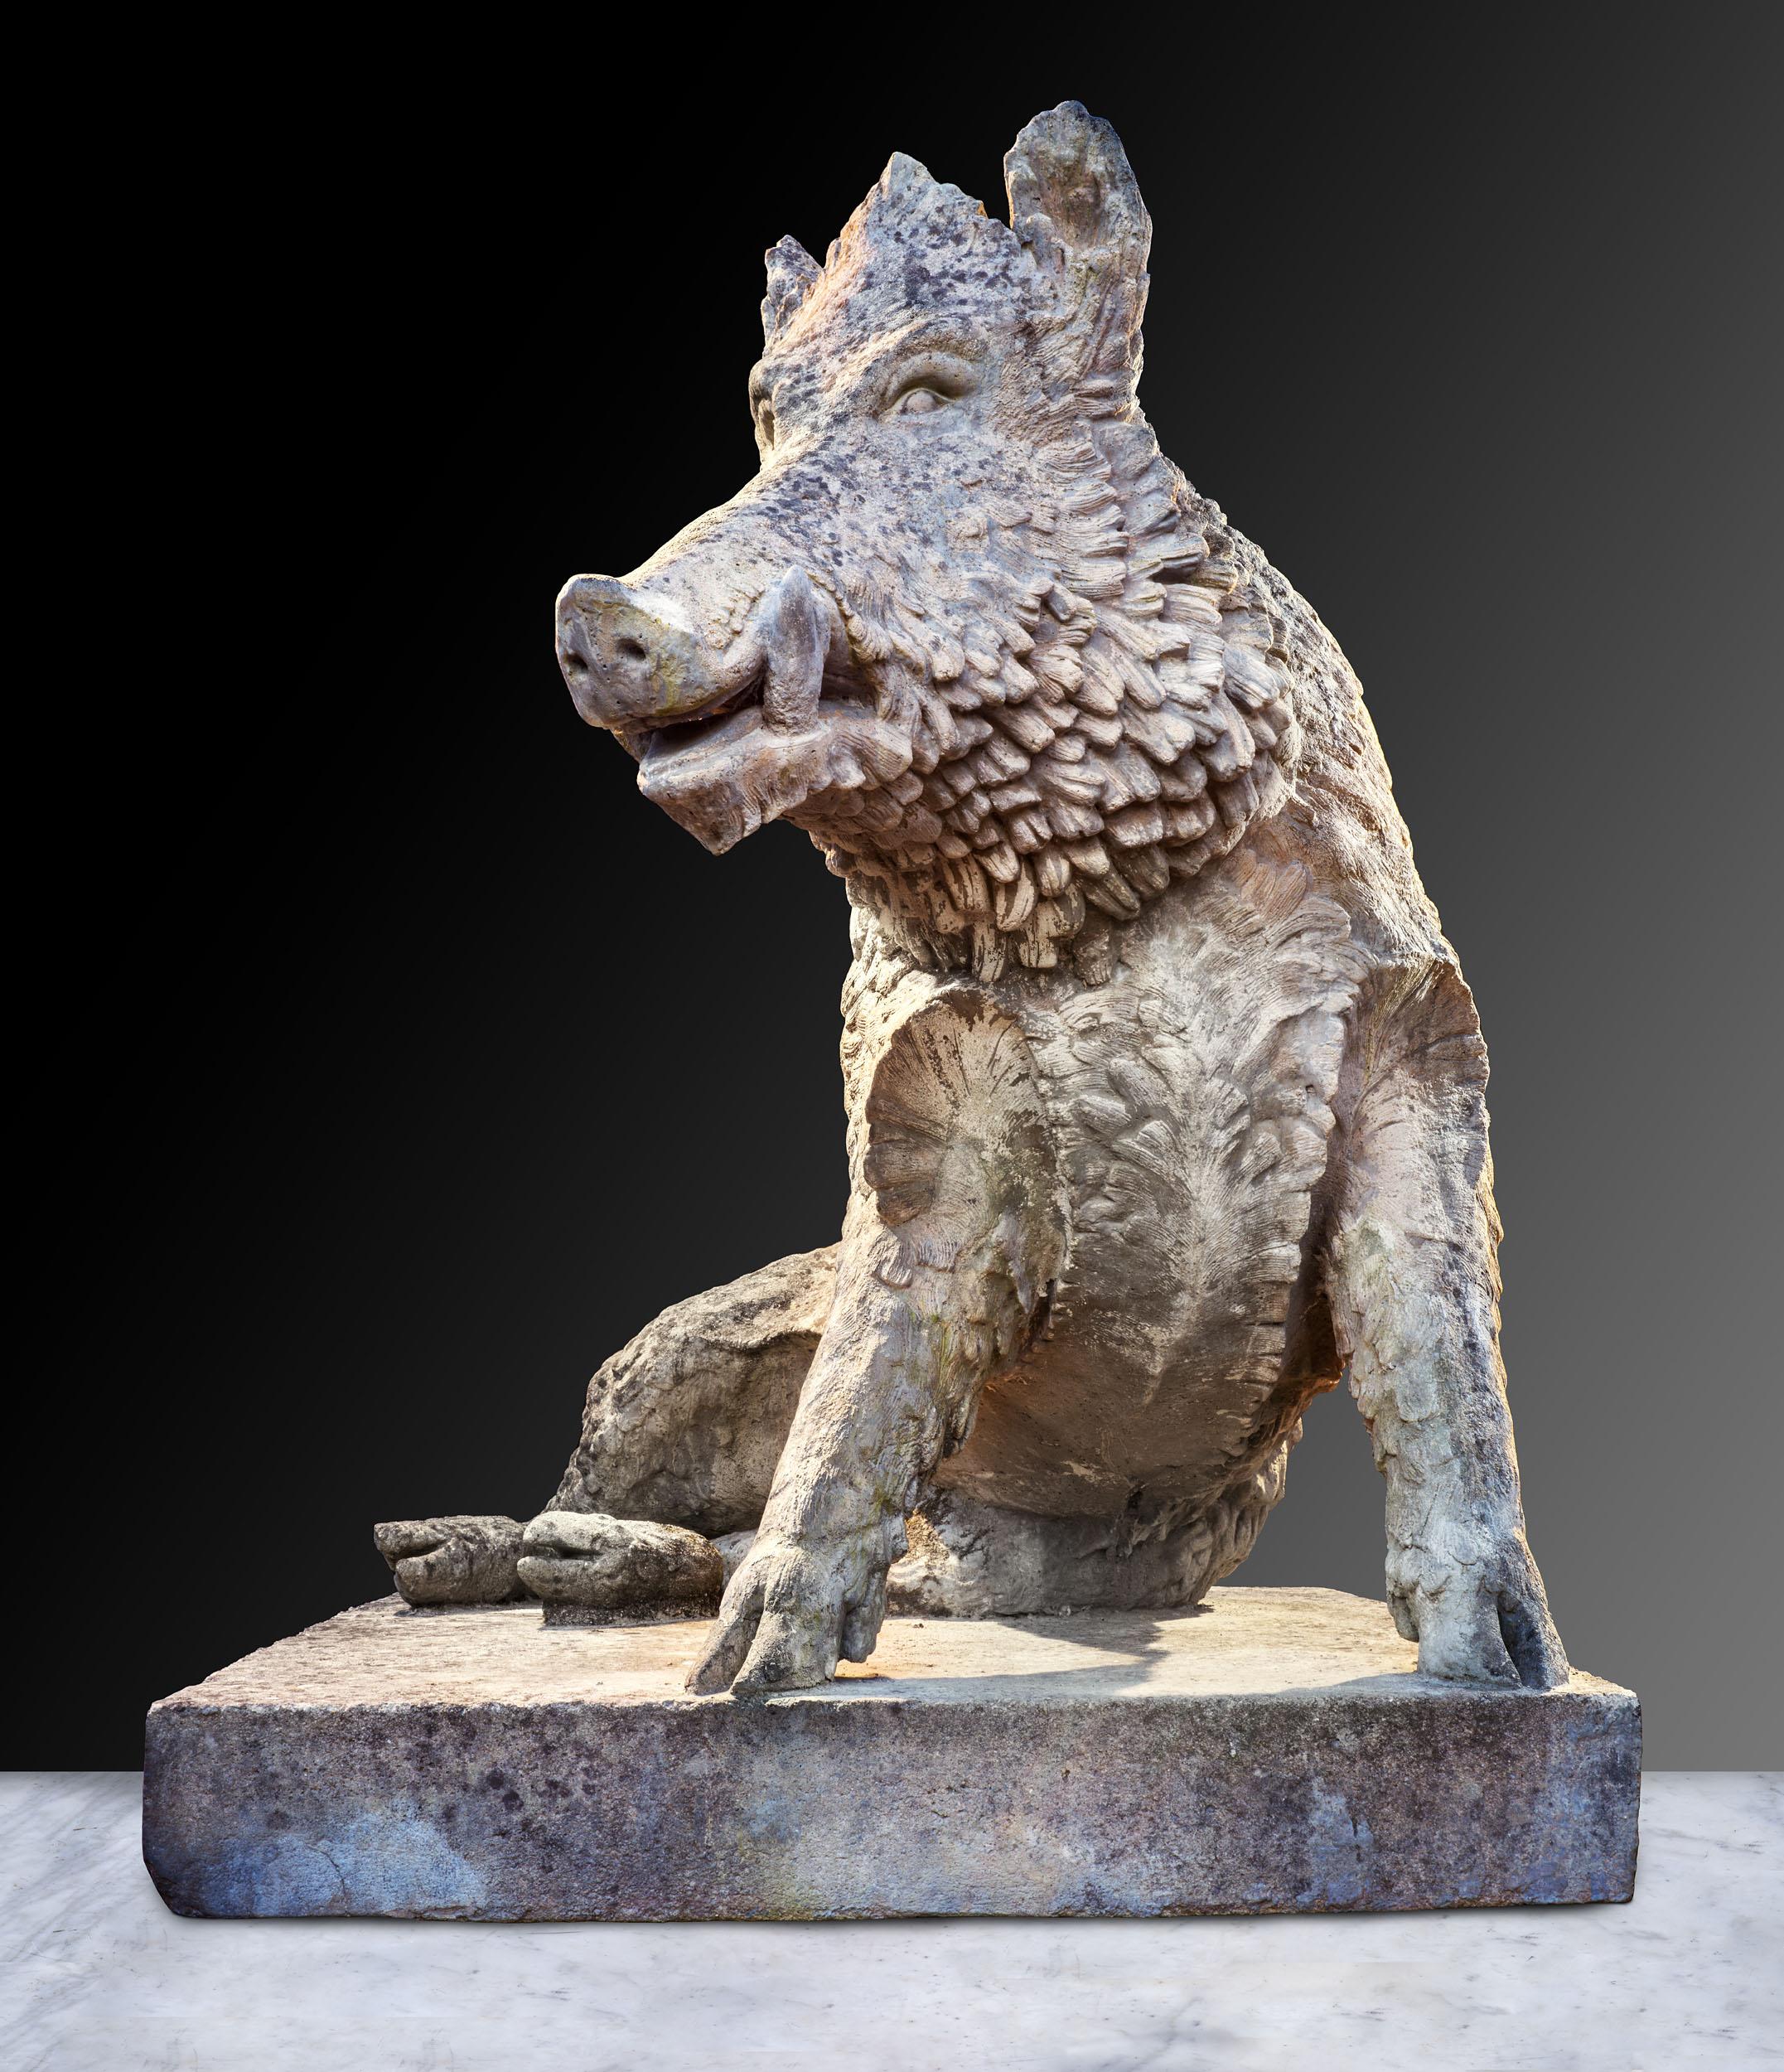 A mid-19th century model of the Uffizi Boar, called 'Il Porcellino', by Austin & Seeley, the seated figure of the boar on an integral square plinth.

This cast stone model of the Uffizi Boar takes its name from a 17th-century bronze fountain by